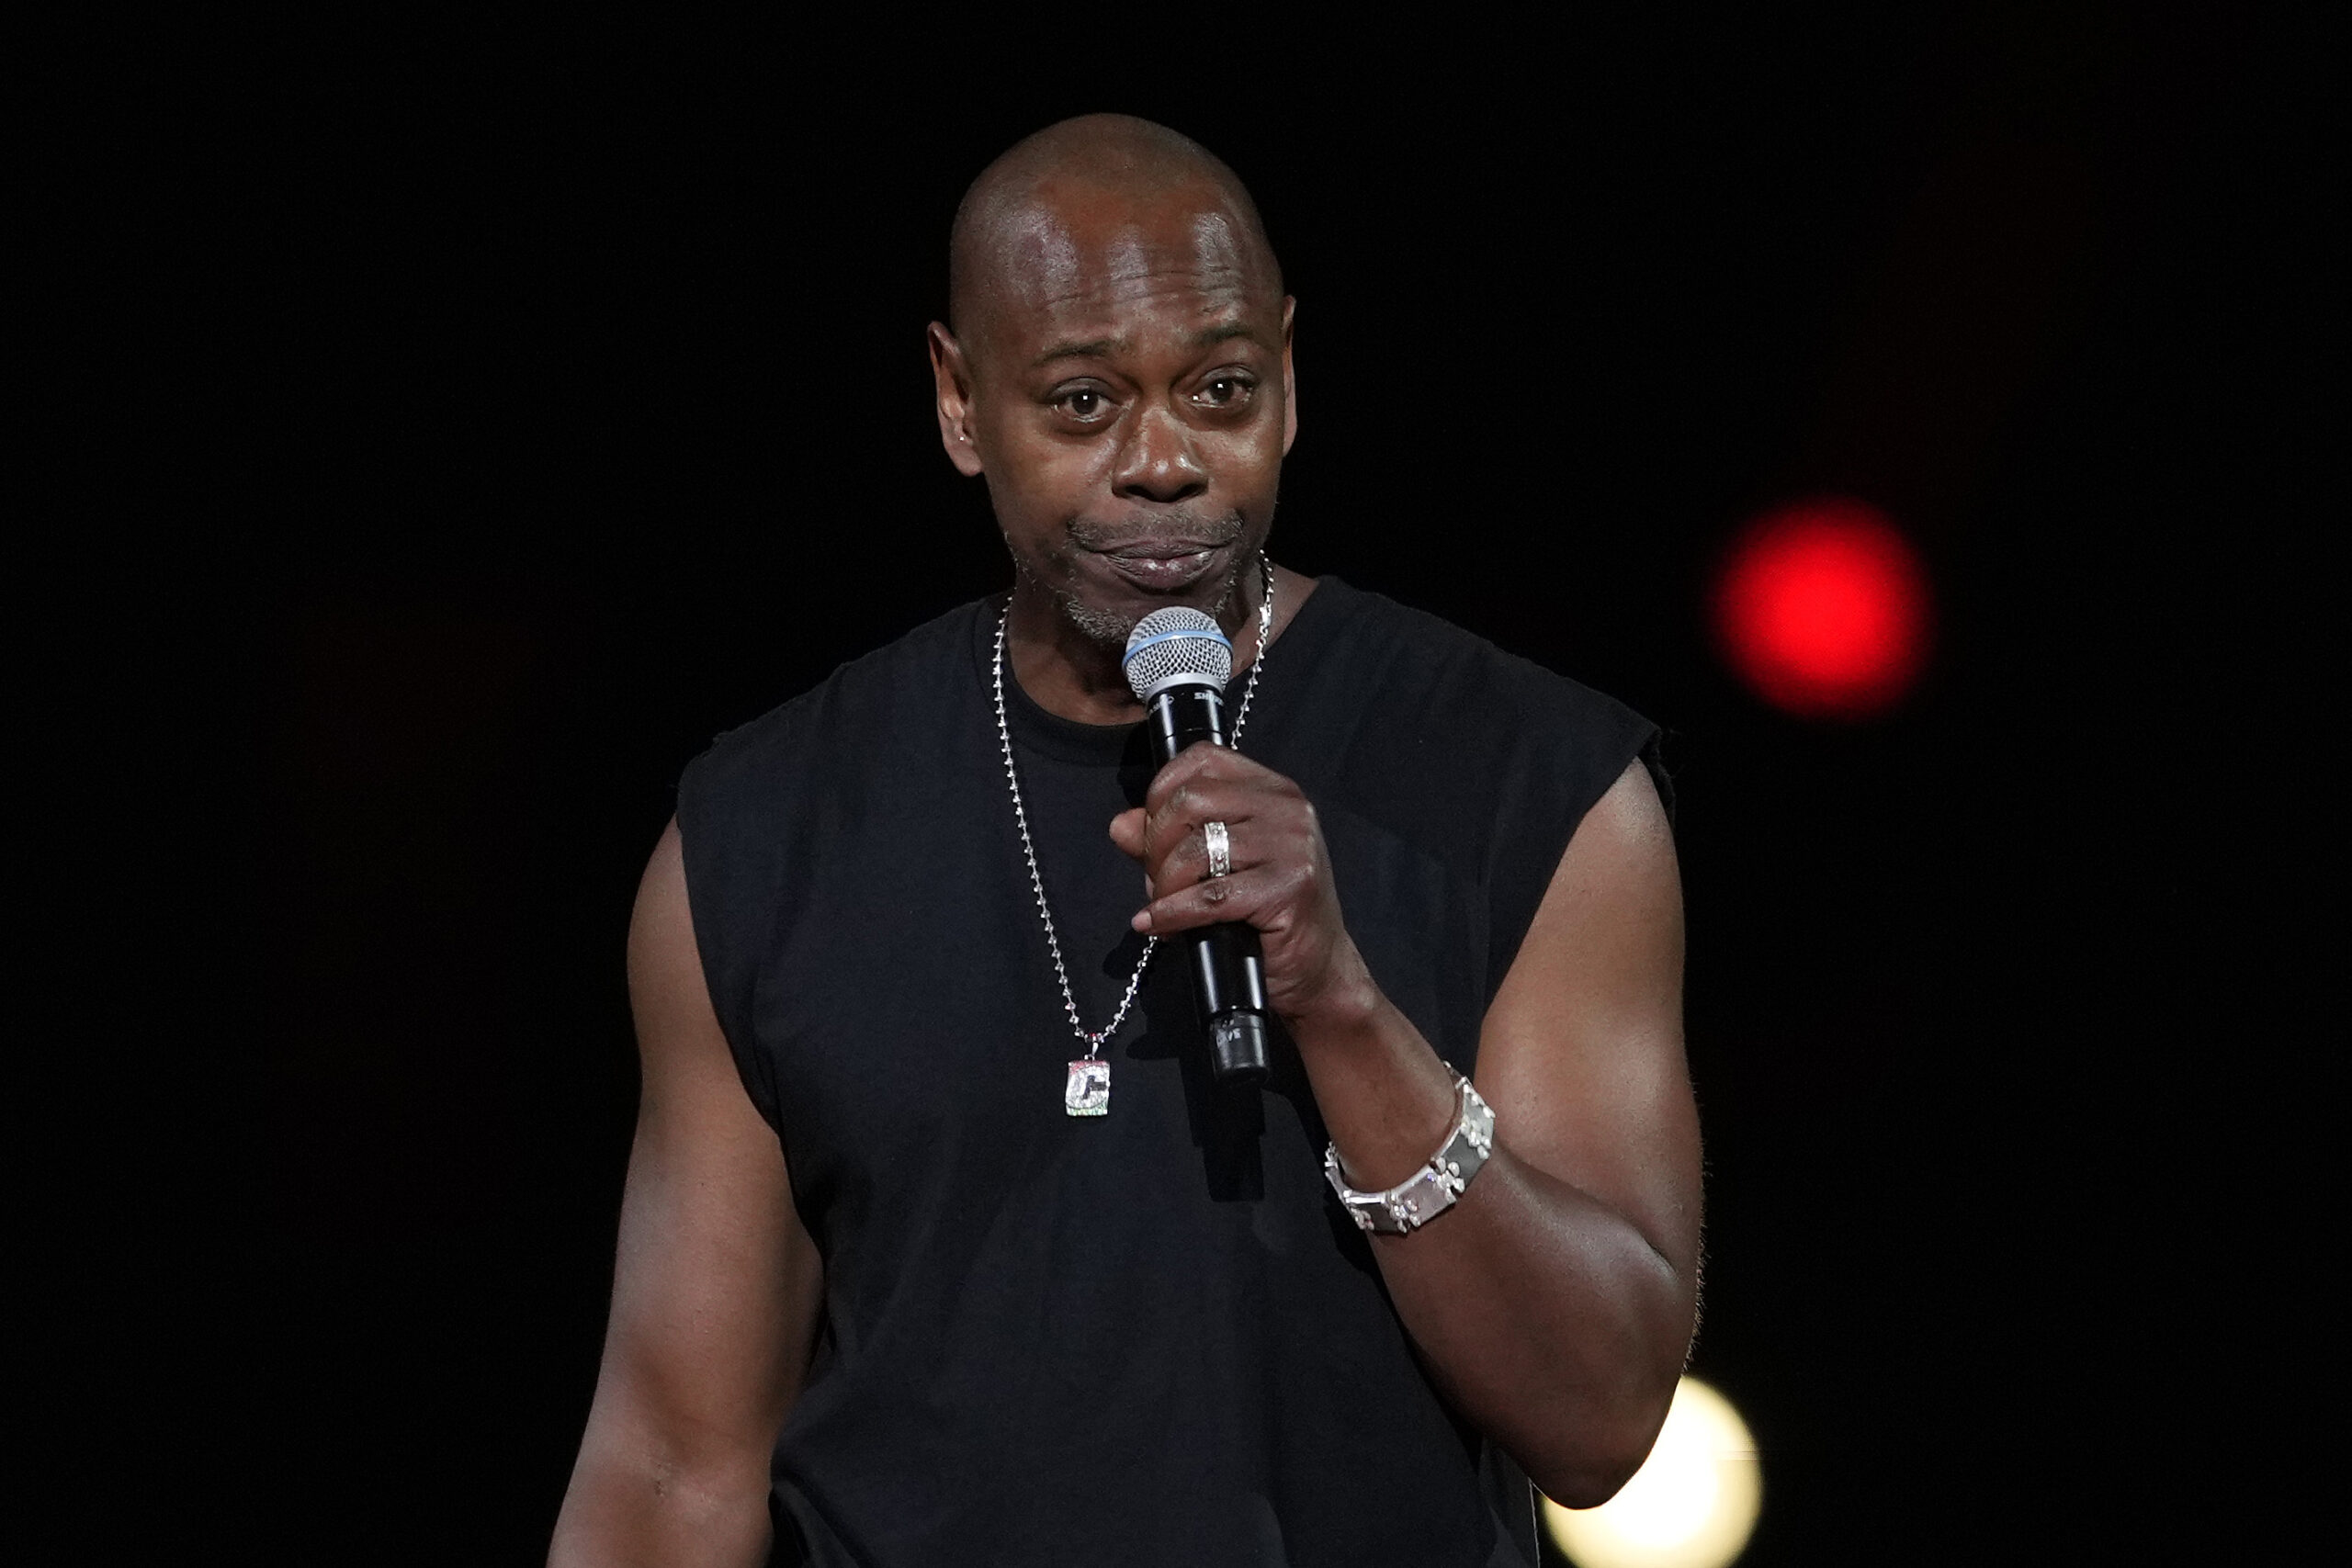 ‘We Were Sick’: Fans Walk Out After Dave Chappelle Accuses Israel Of ‘War Crimes’, U.S. of Supporting ‘Slaughter’ – Report